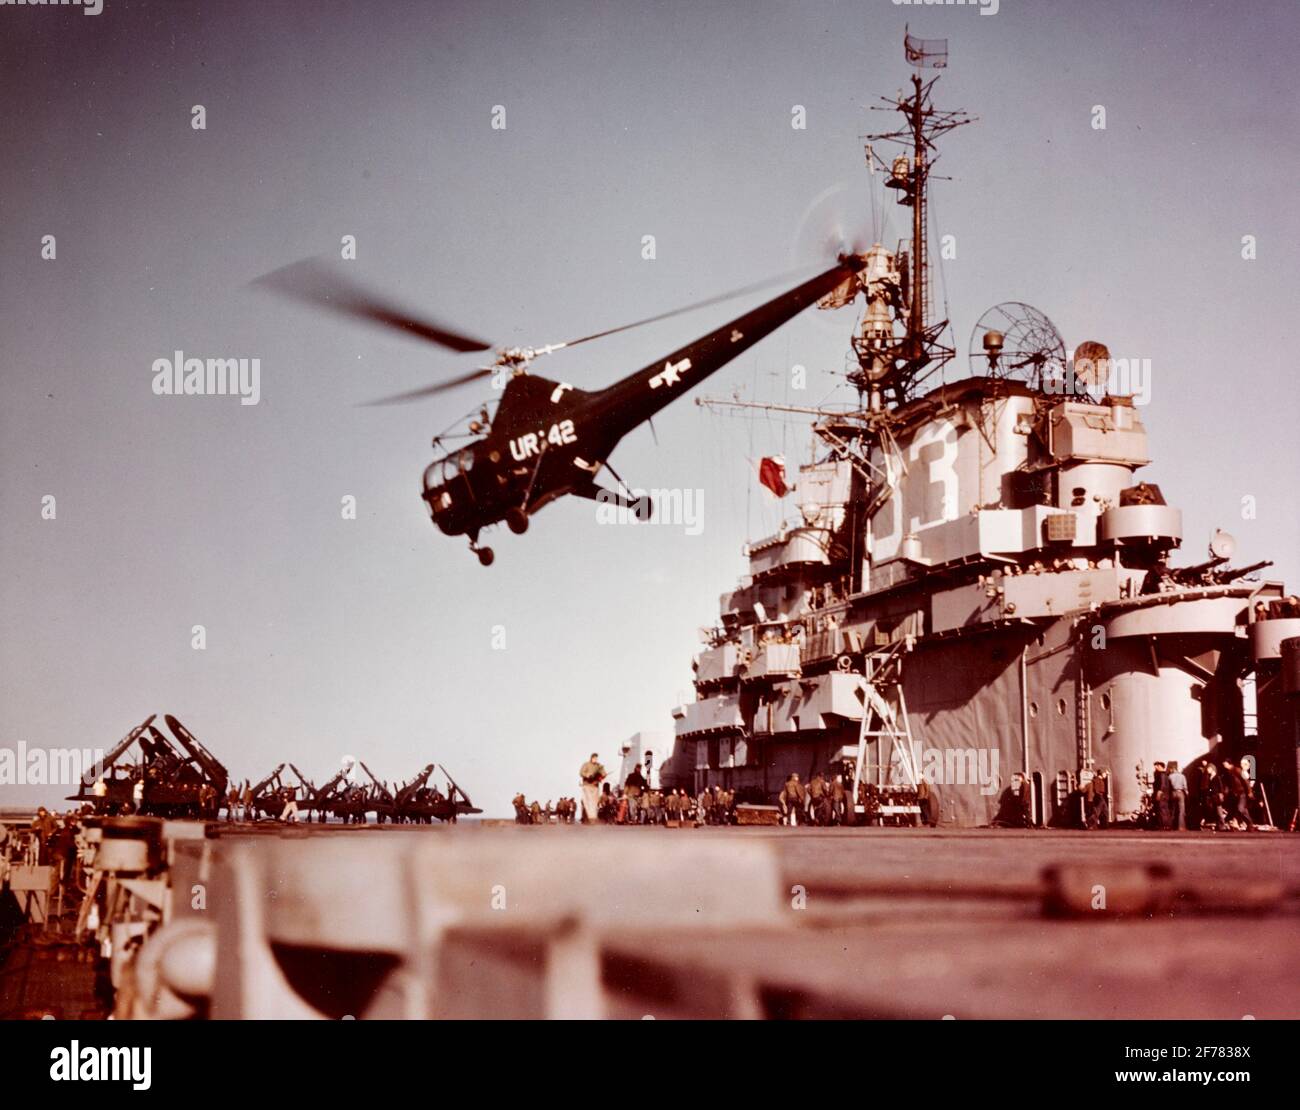 USS Kearsarge (CV-33) Sikorsky HO3S-1 helicopter in flight over the carrier's flight deck, during Operation Frigid, November 1948. Official U.S. Navy Photograph Stock Photo